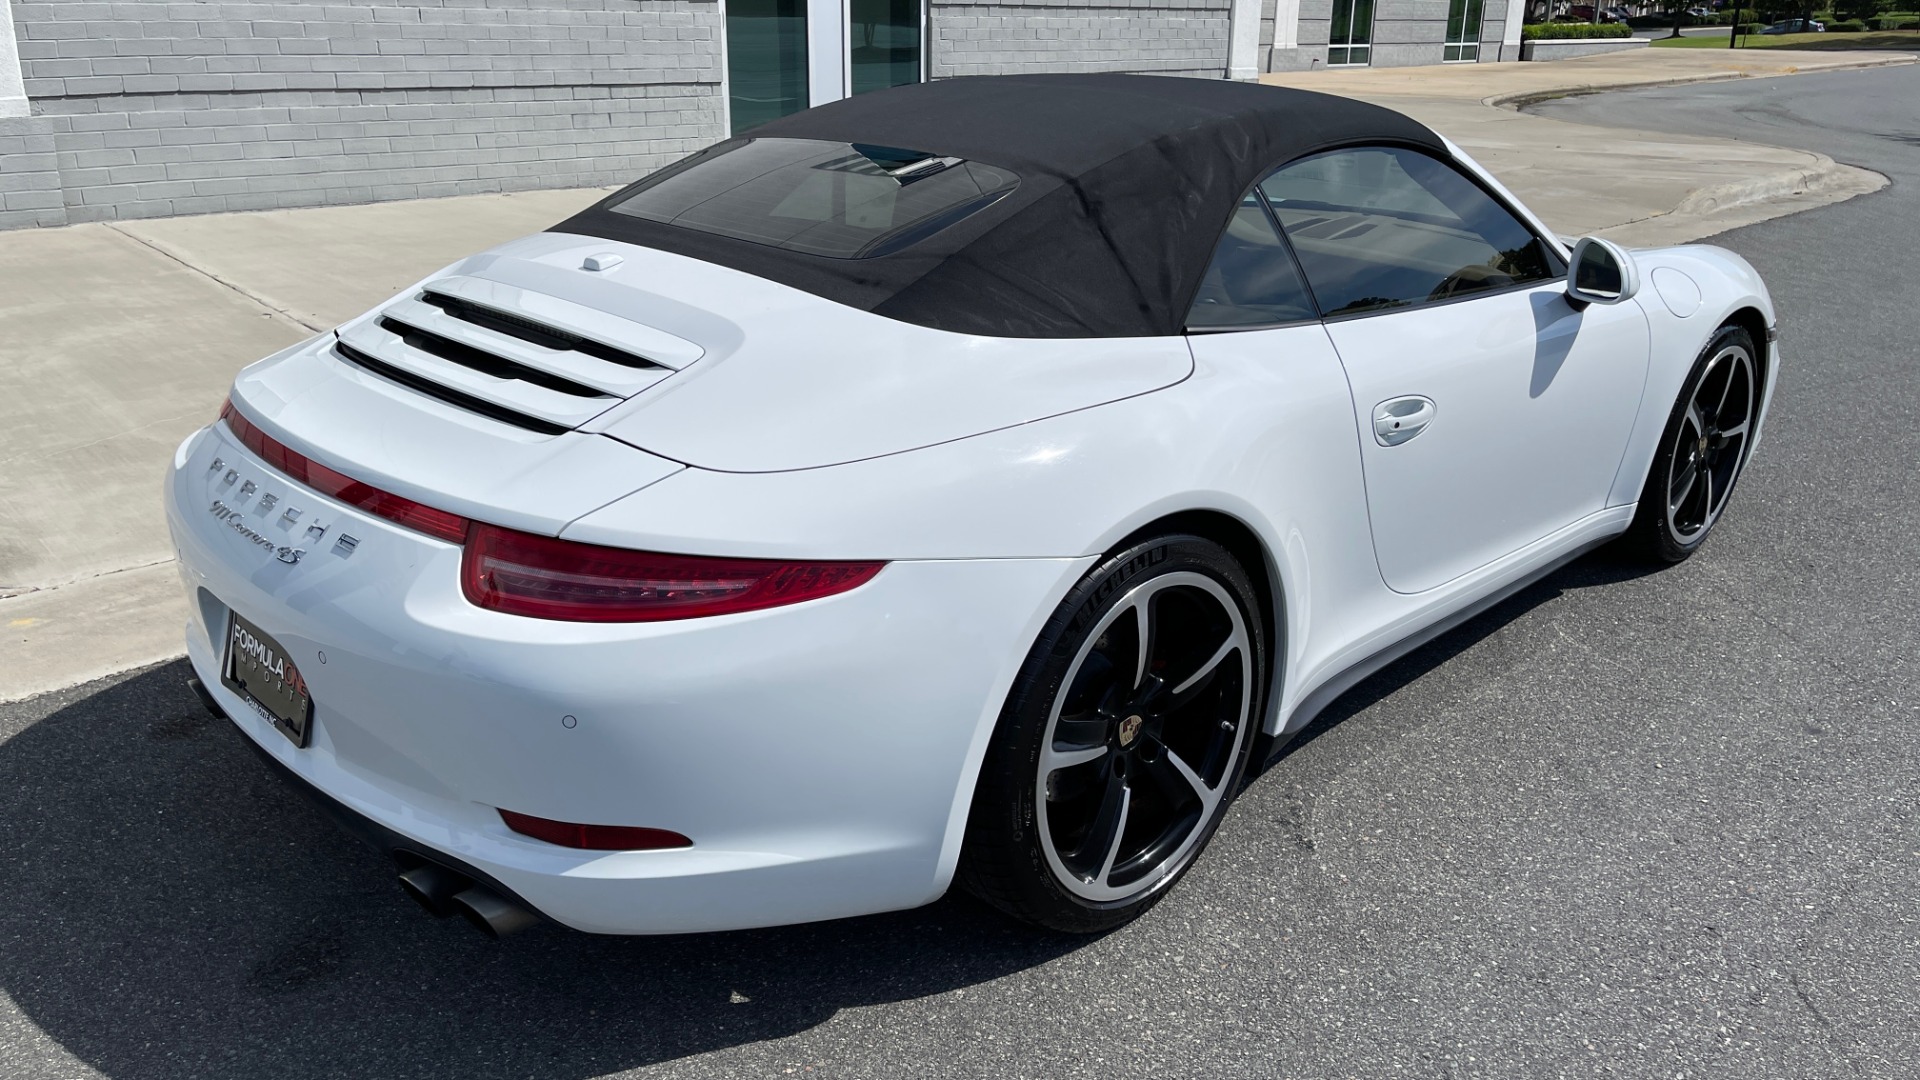 Used 2013 Porsche 911 CARRERA 4S CABRIOLET / PREMIUM PLUS / BOSE / PDK / PDLS for sale Sold at Formula Imports in Charlotte NC 28227 31